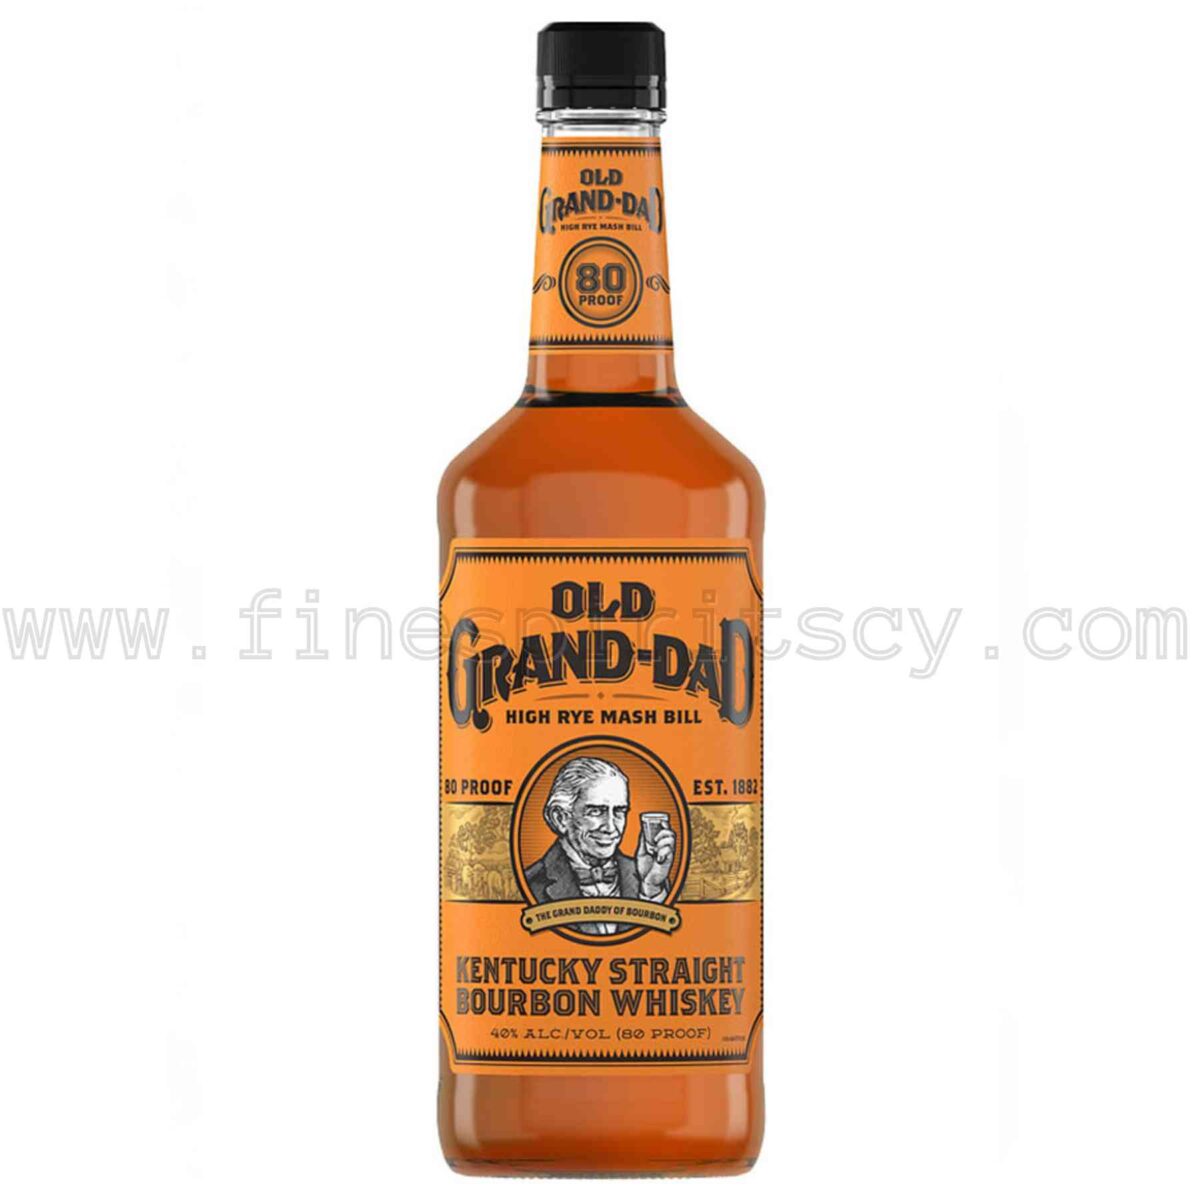 Old Grand Dad 80 Proof 40% Bourbon